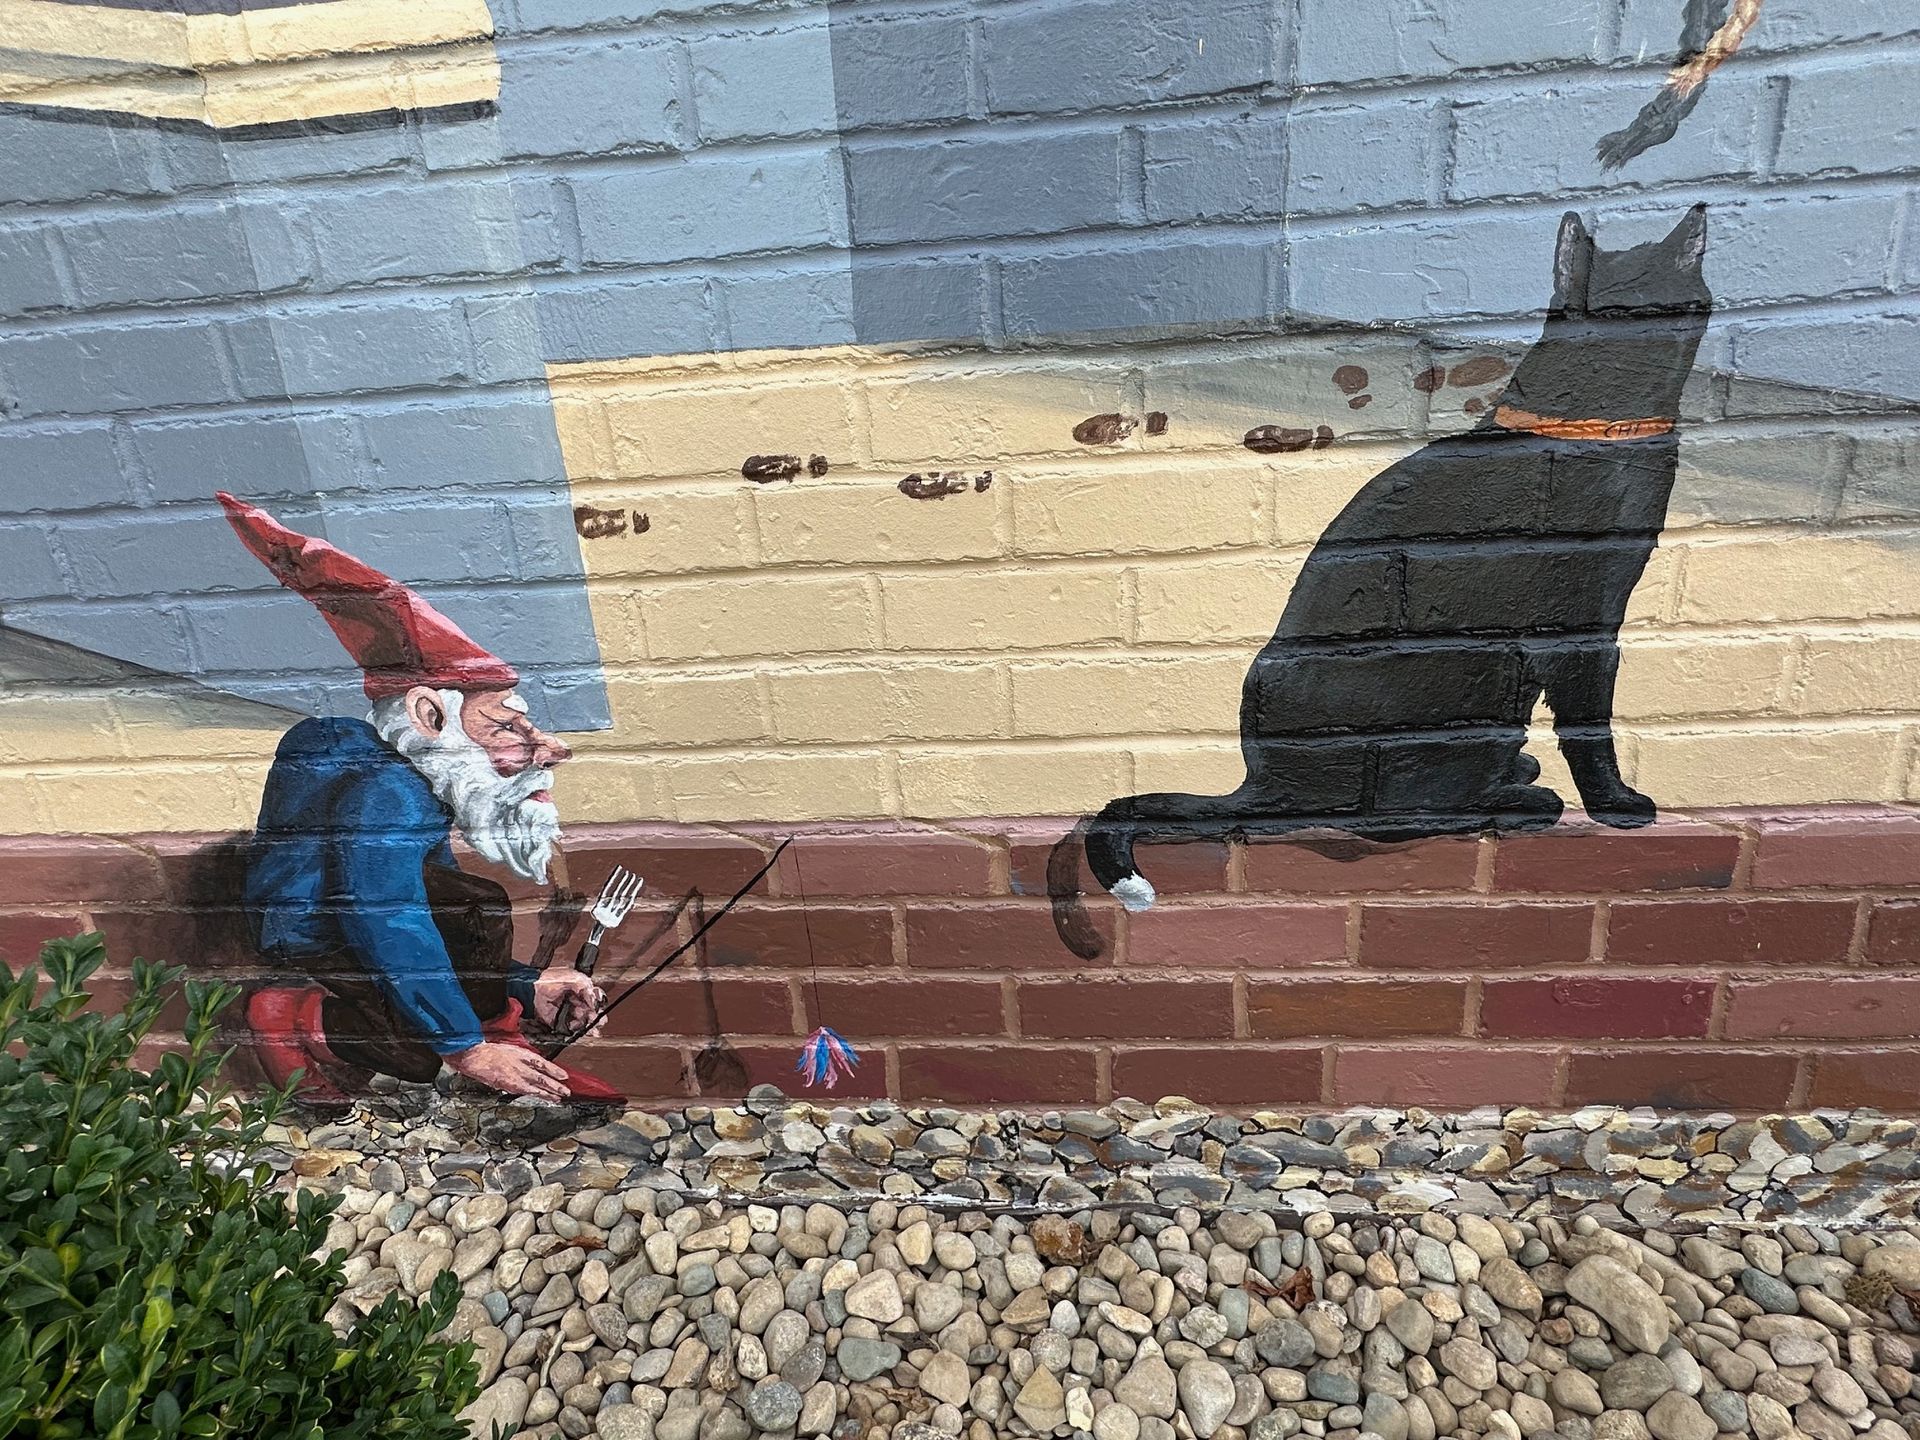 Gnome/Dwarf and Cat Close-up of Painting Characters in Her Books Painted on This Exterior Brick Wall - Exterior and Residential Mural Art